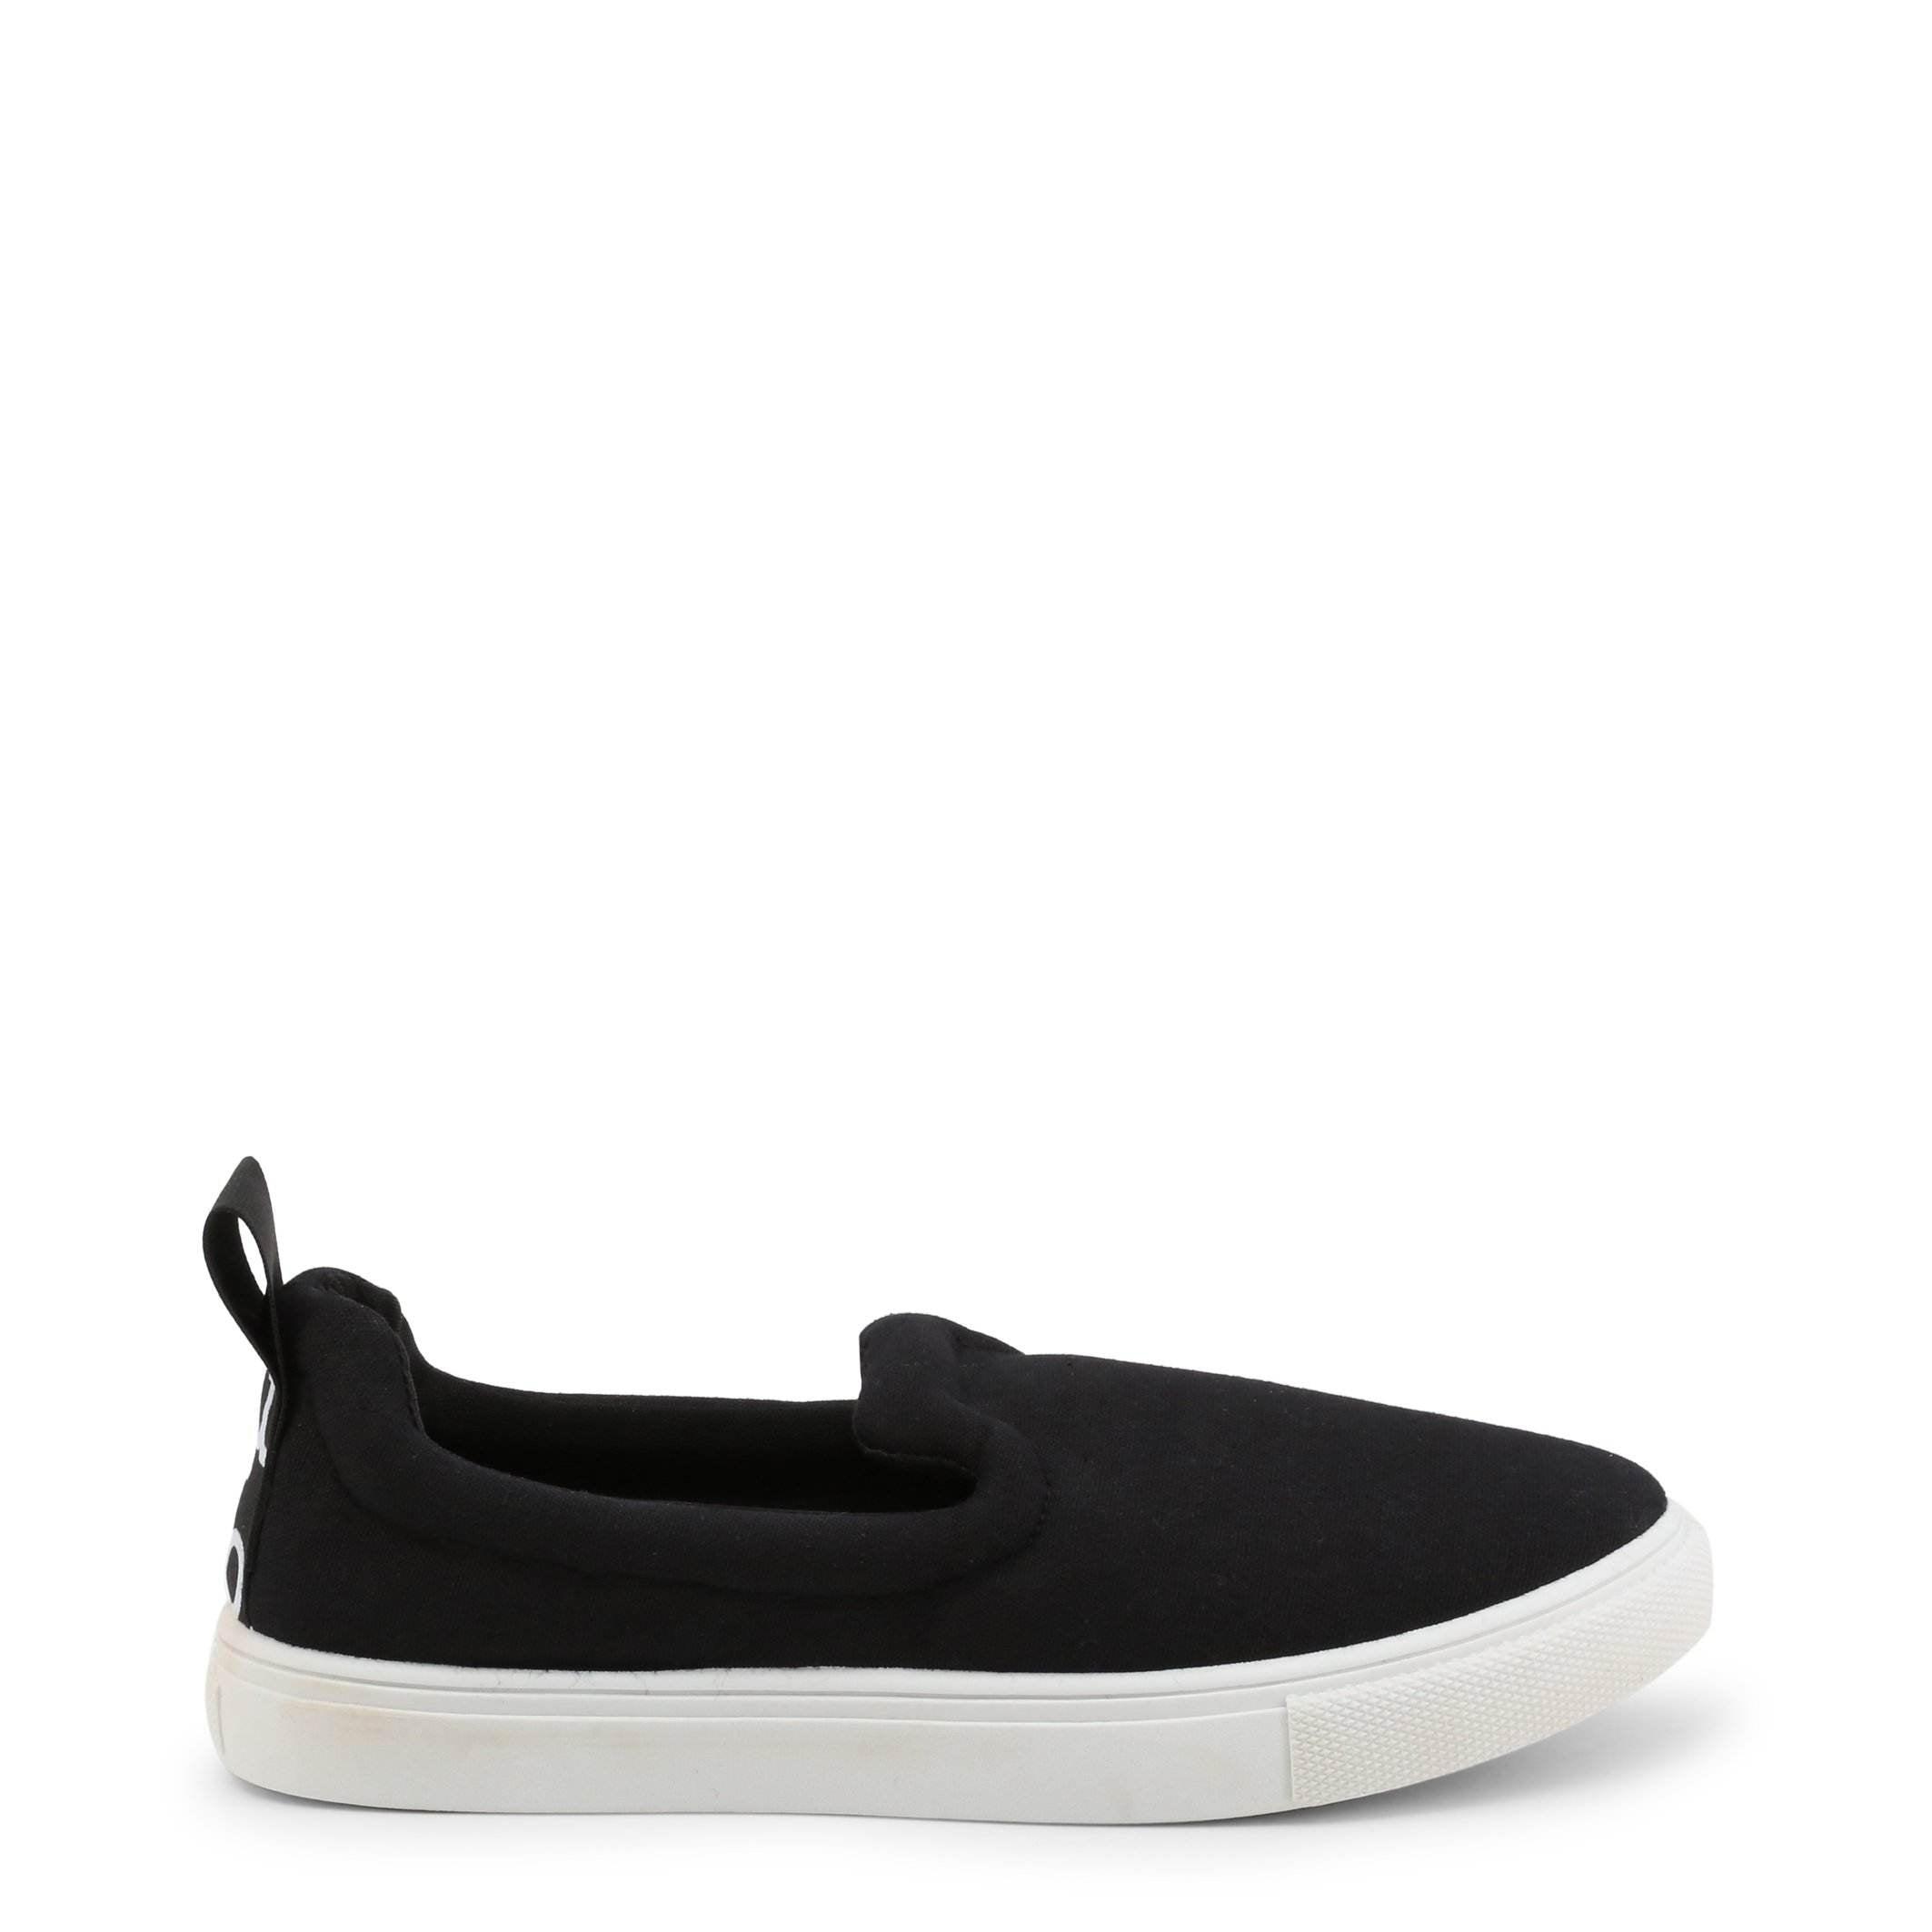 Roccobarocco Slip-on Sneakers in Black - Lyst